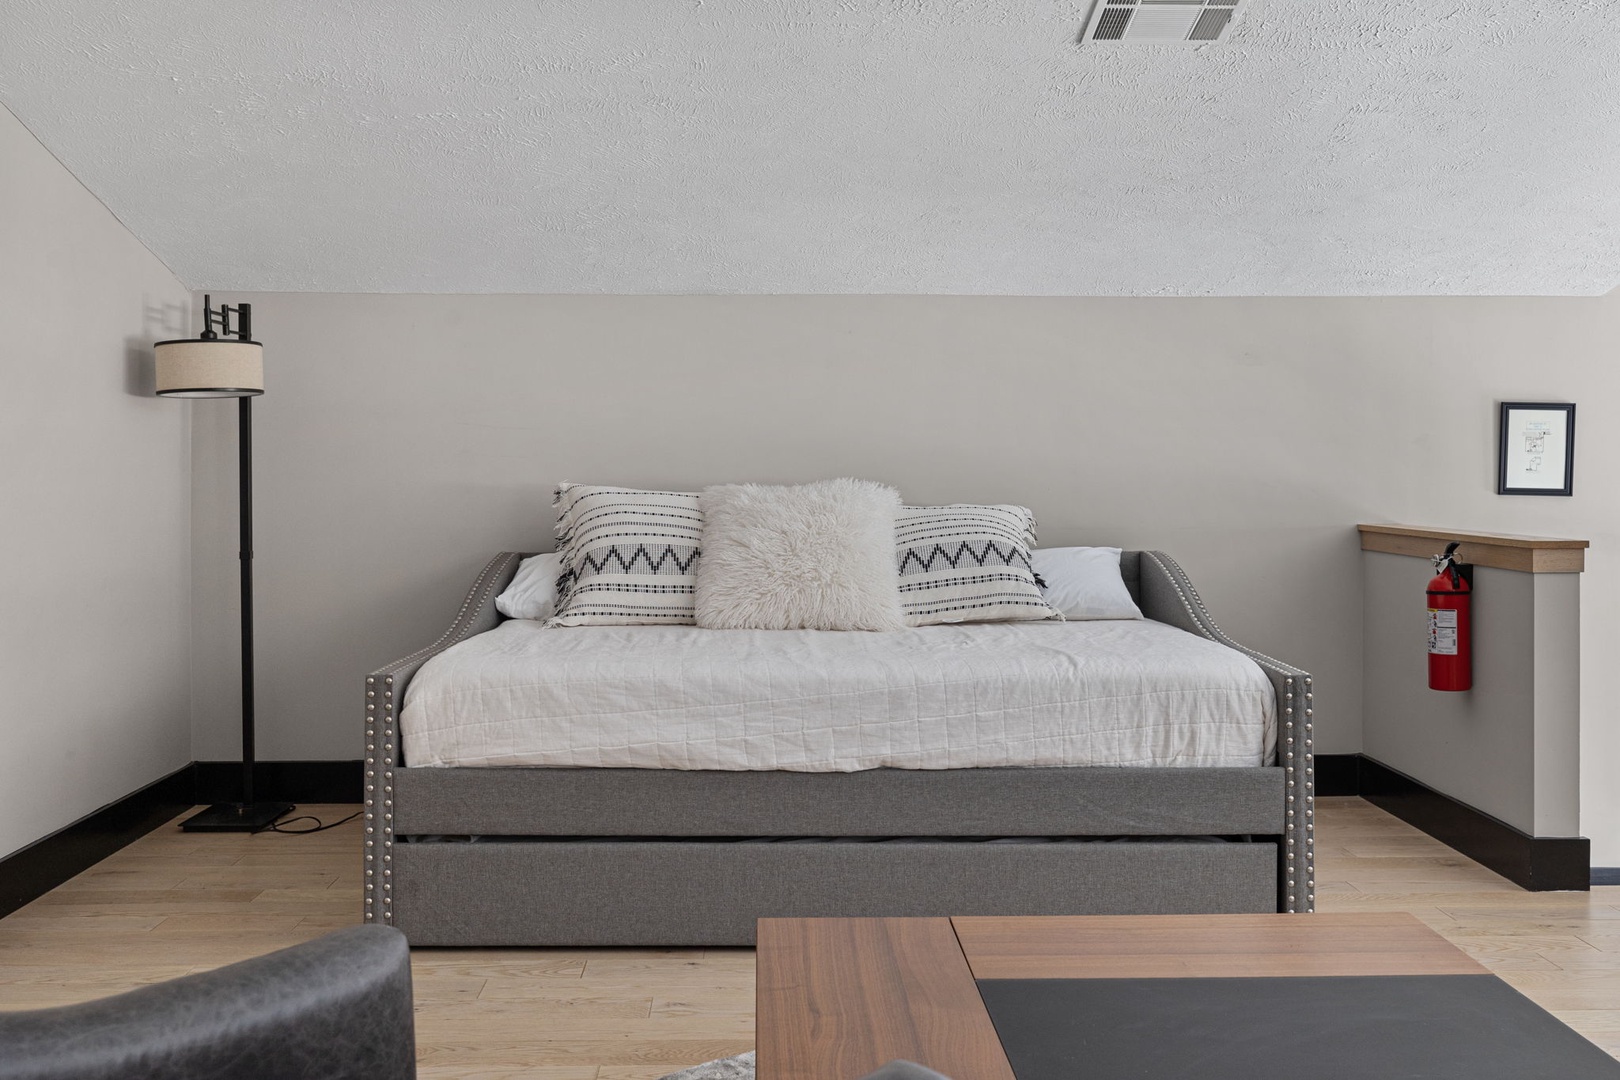 You and your guests will have sweet dreams in any of this loft’s cozy beds.